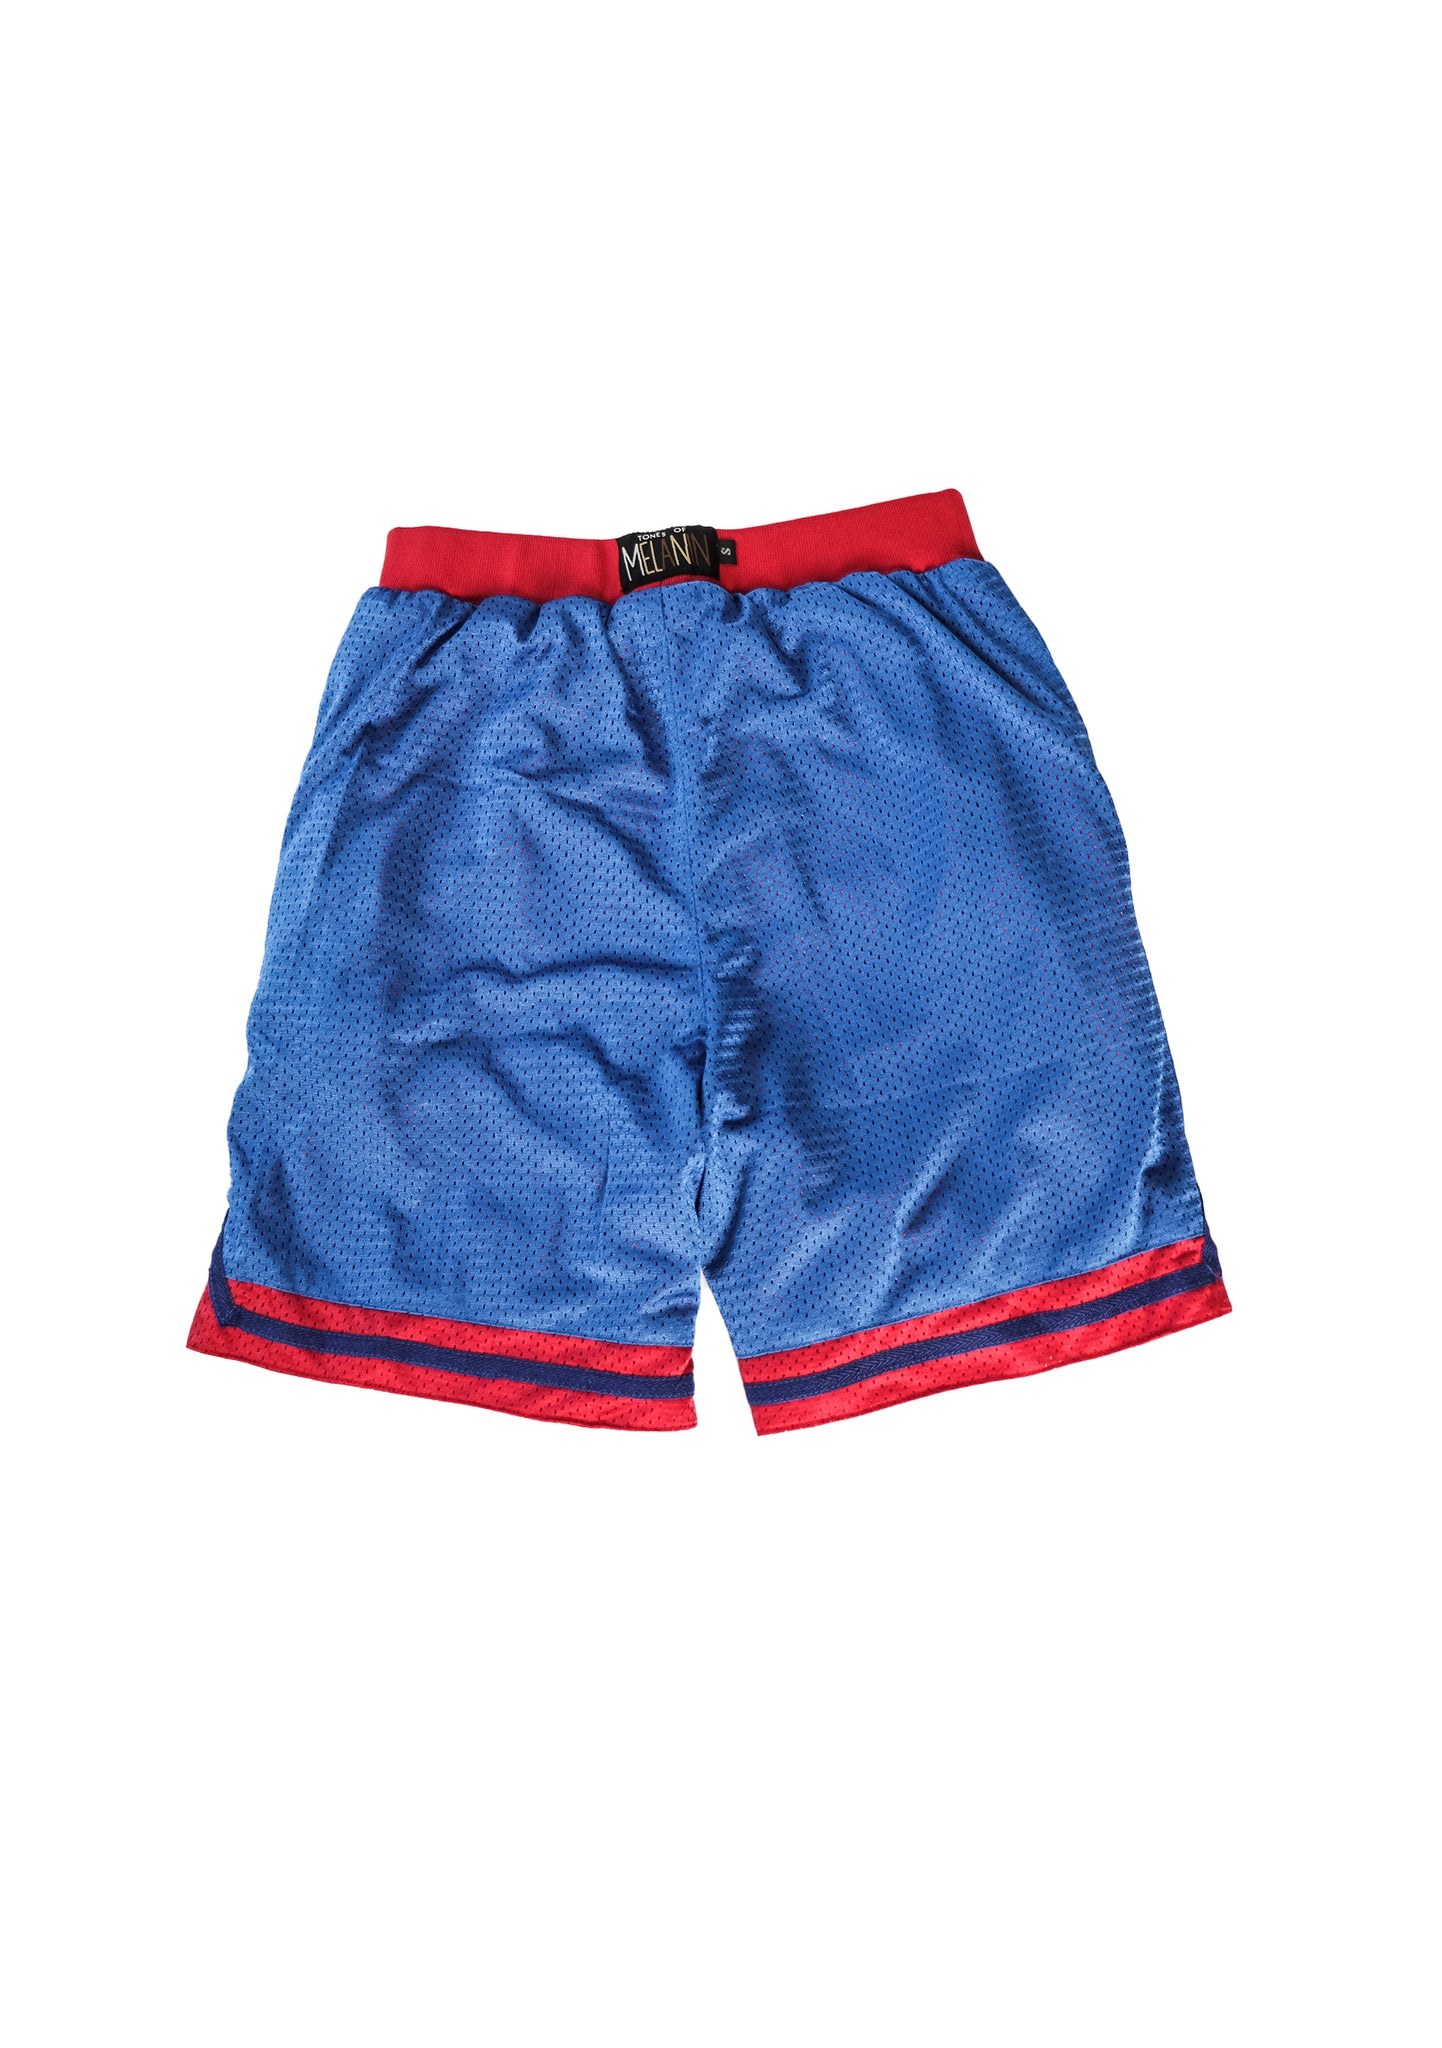 Tennessee State Reversible Basketball Shorts